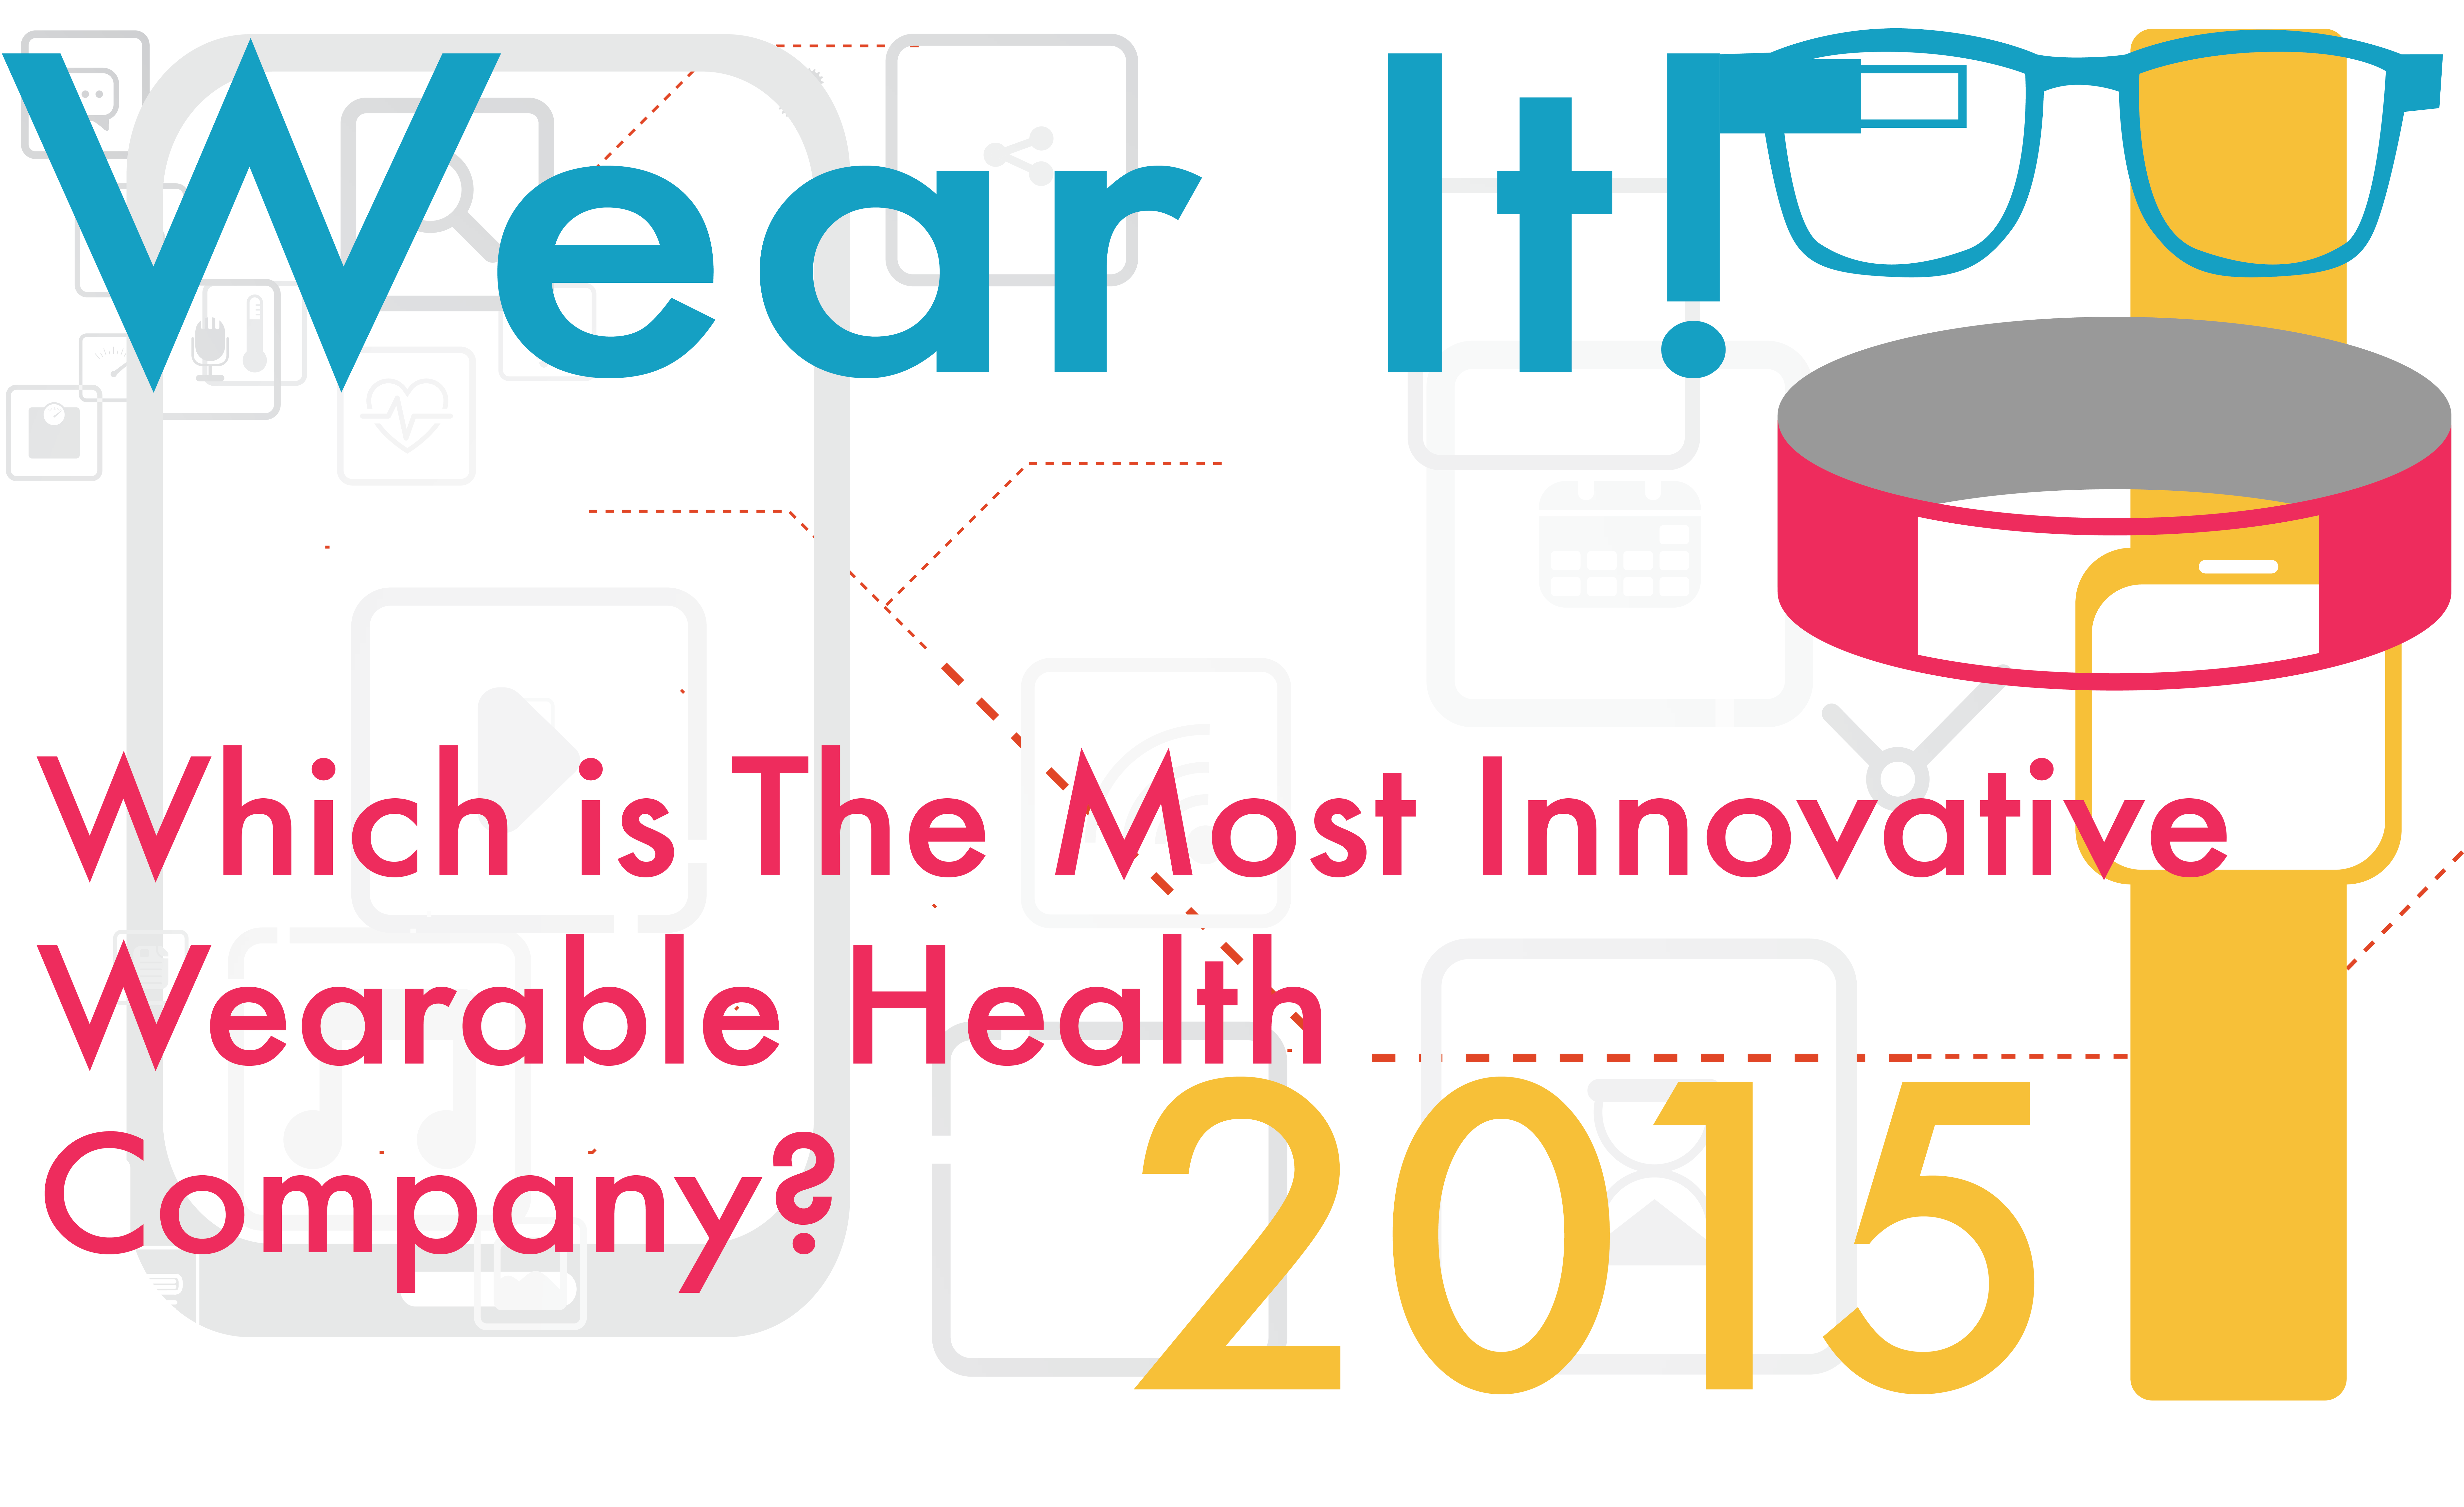 Who are 2015’s Most Innovative Wearable Health Companies?